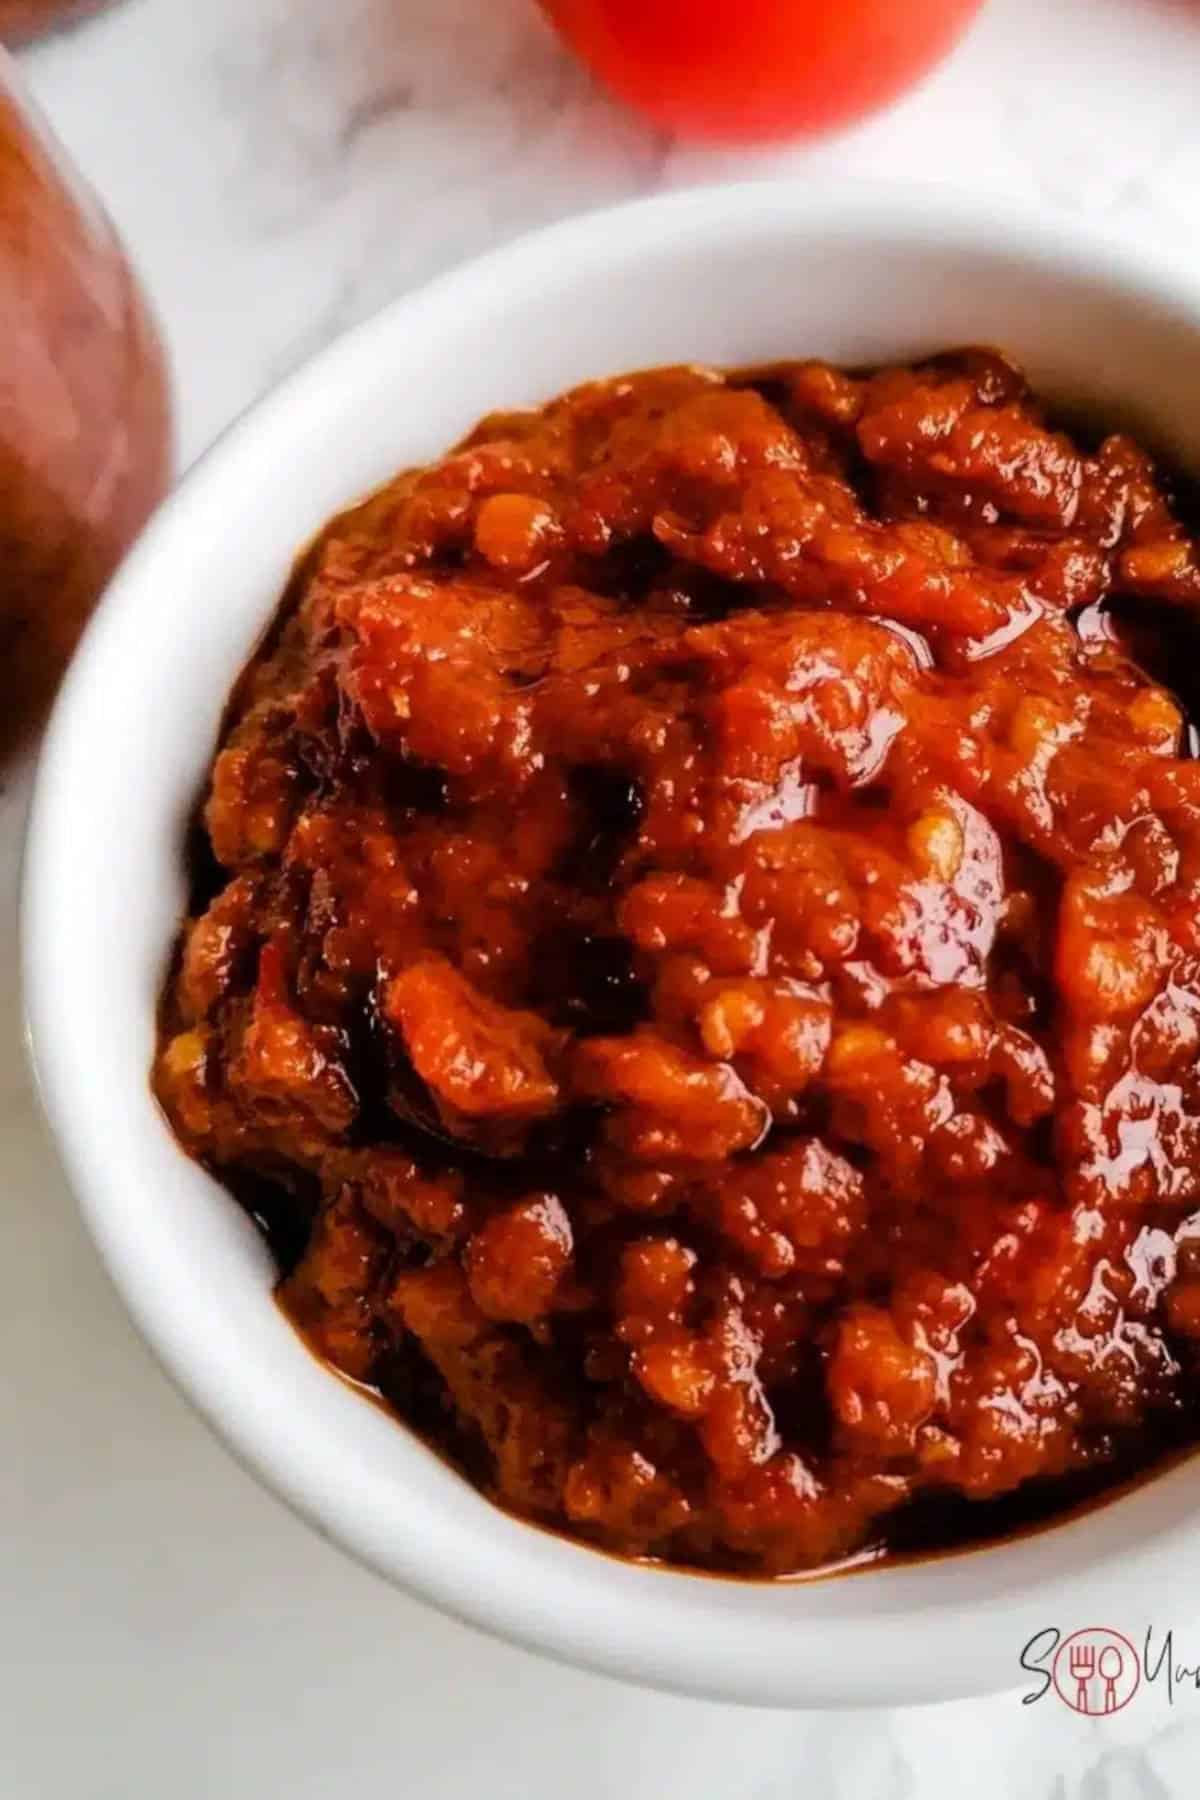 Close up image of sambal in a white bowl.